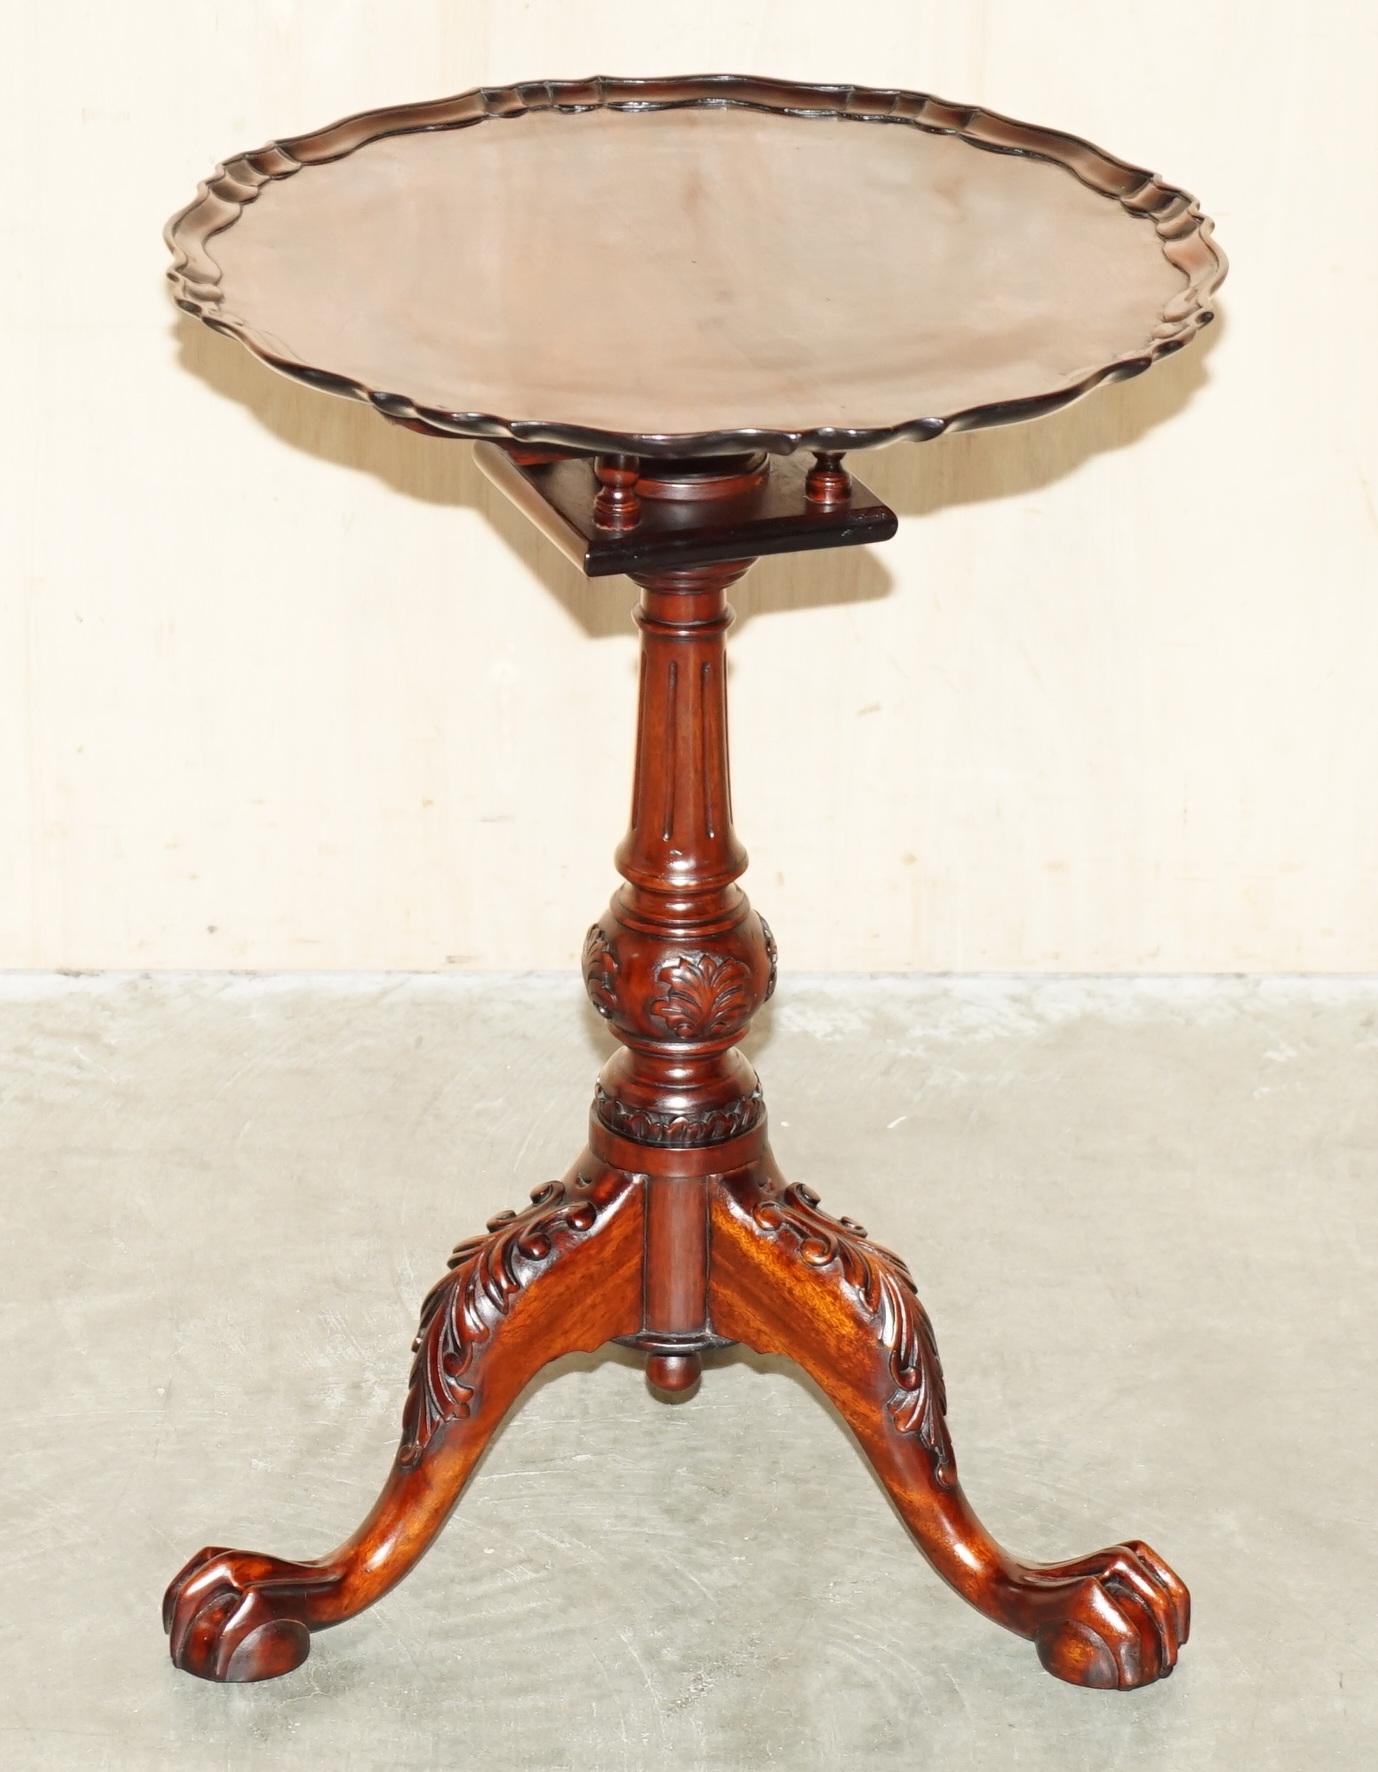 Royal House Antiques

Royal House Antiques is delighted to offer for sale this lovely circa 1940's Thomas Chippendale style tripod table in flamed mahogany with hand carved Claw & Ball feet

Please note the delivery fee listed is just a guide, it